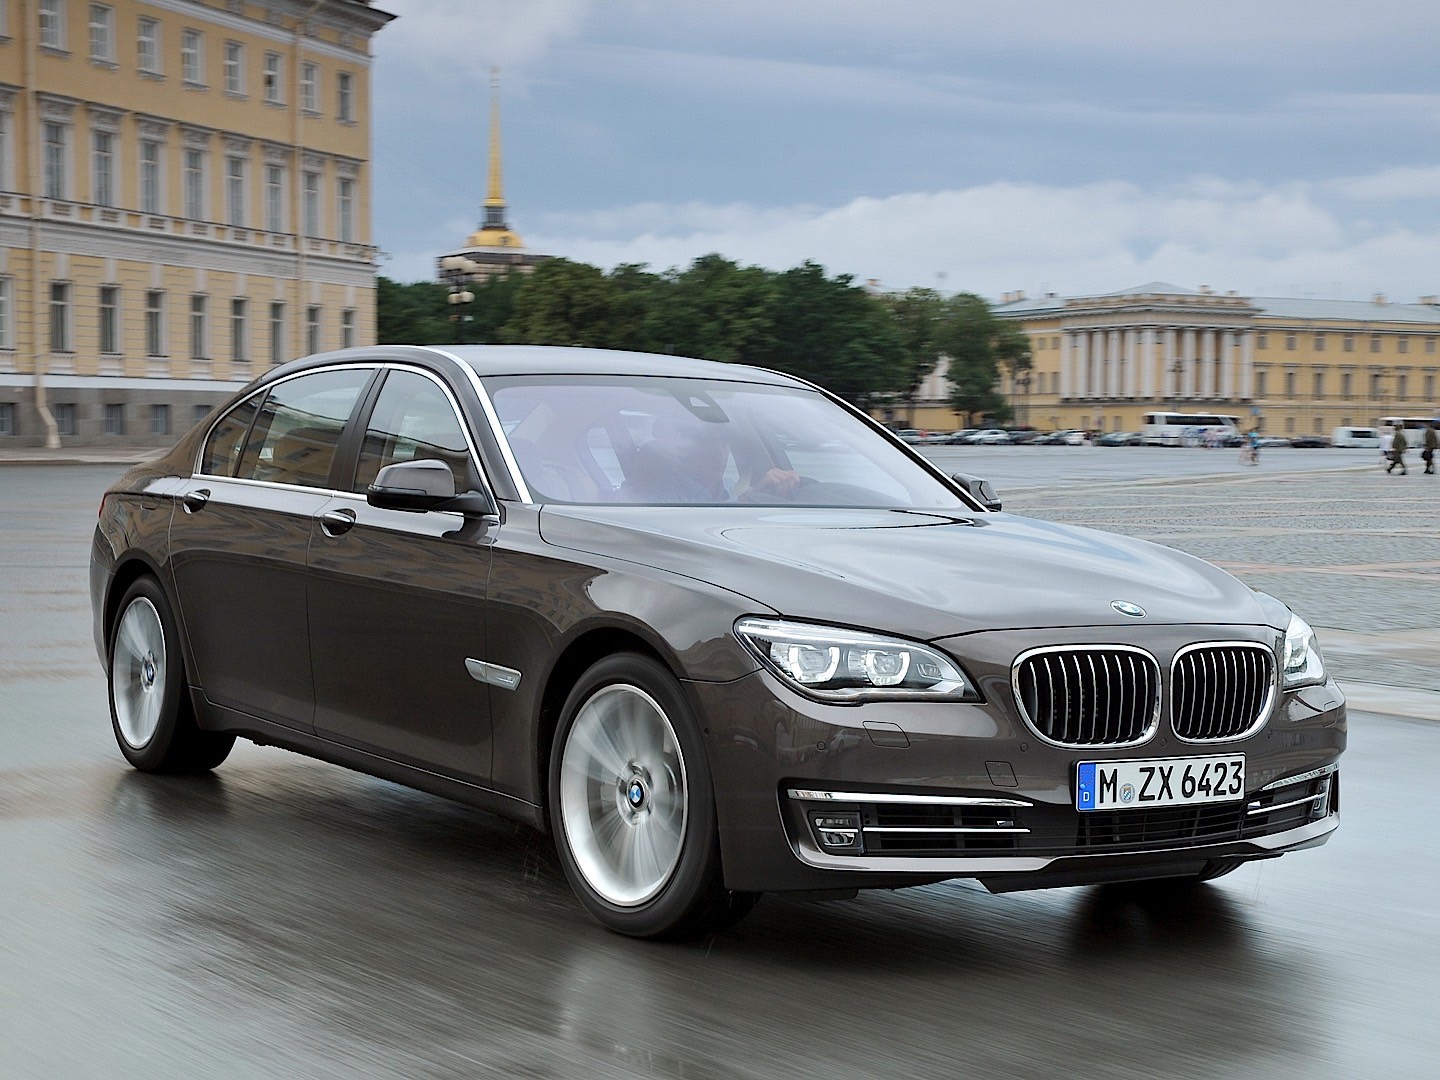 BMW 7 Series (F01/02) Facelift 2012, 2013, 2014, 2015